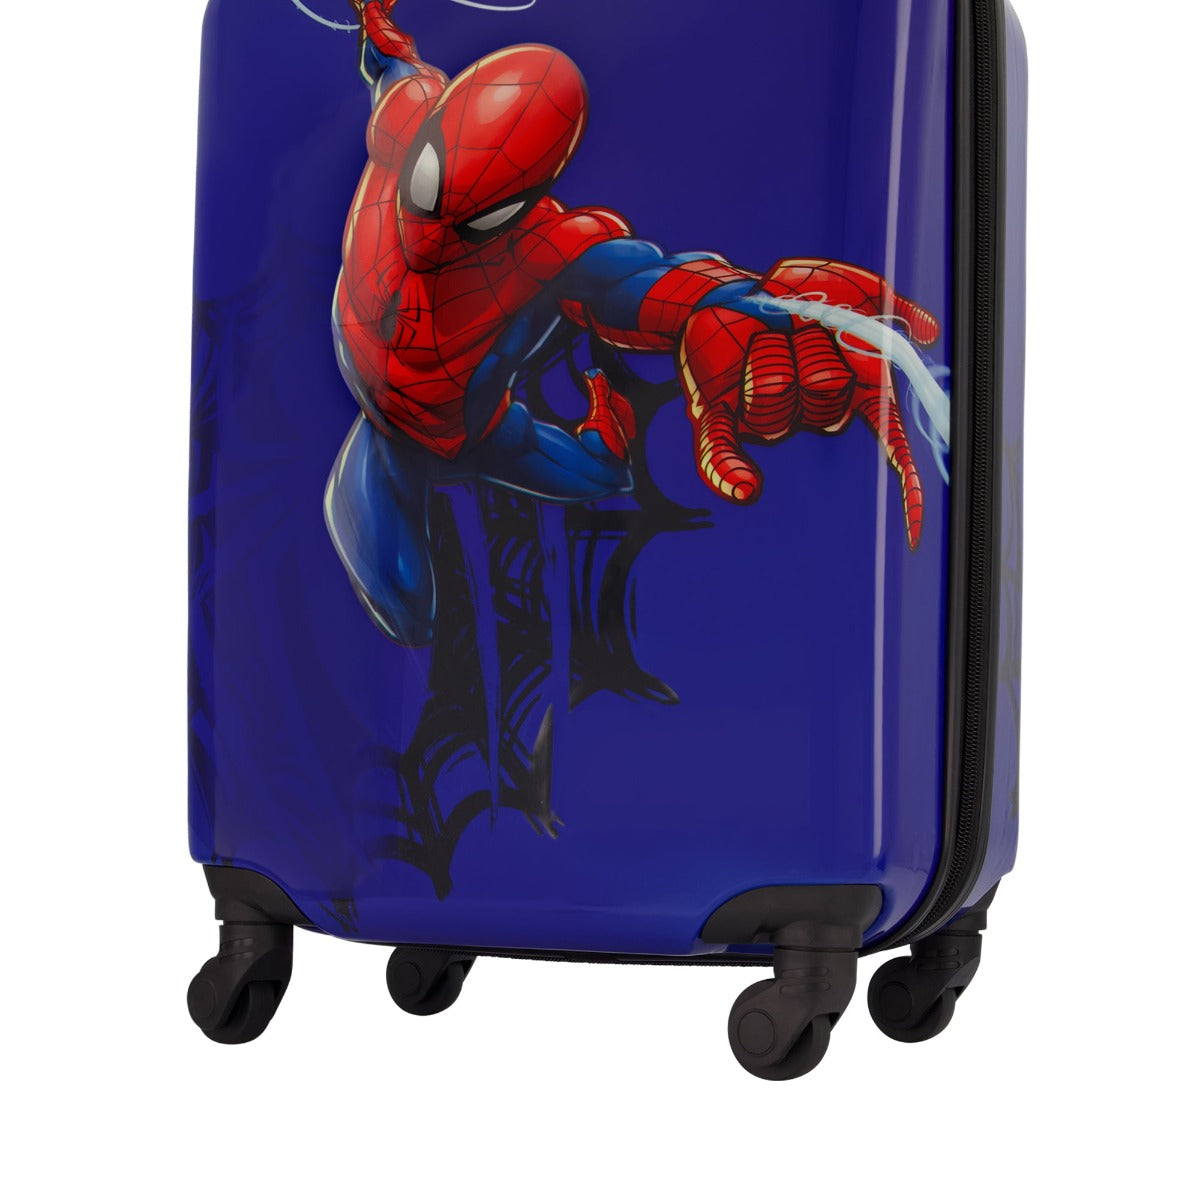 Blue Ful Marvel Spiderman Web matching 2 piece set - kids carry-on 21 inch rolling luggage for kids